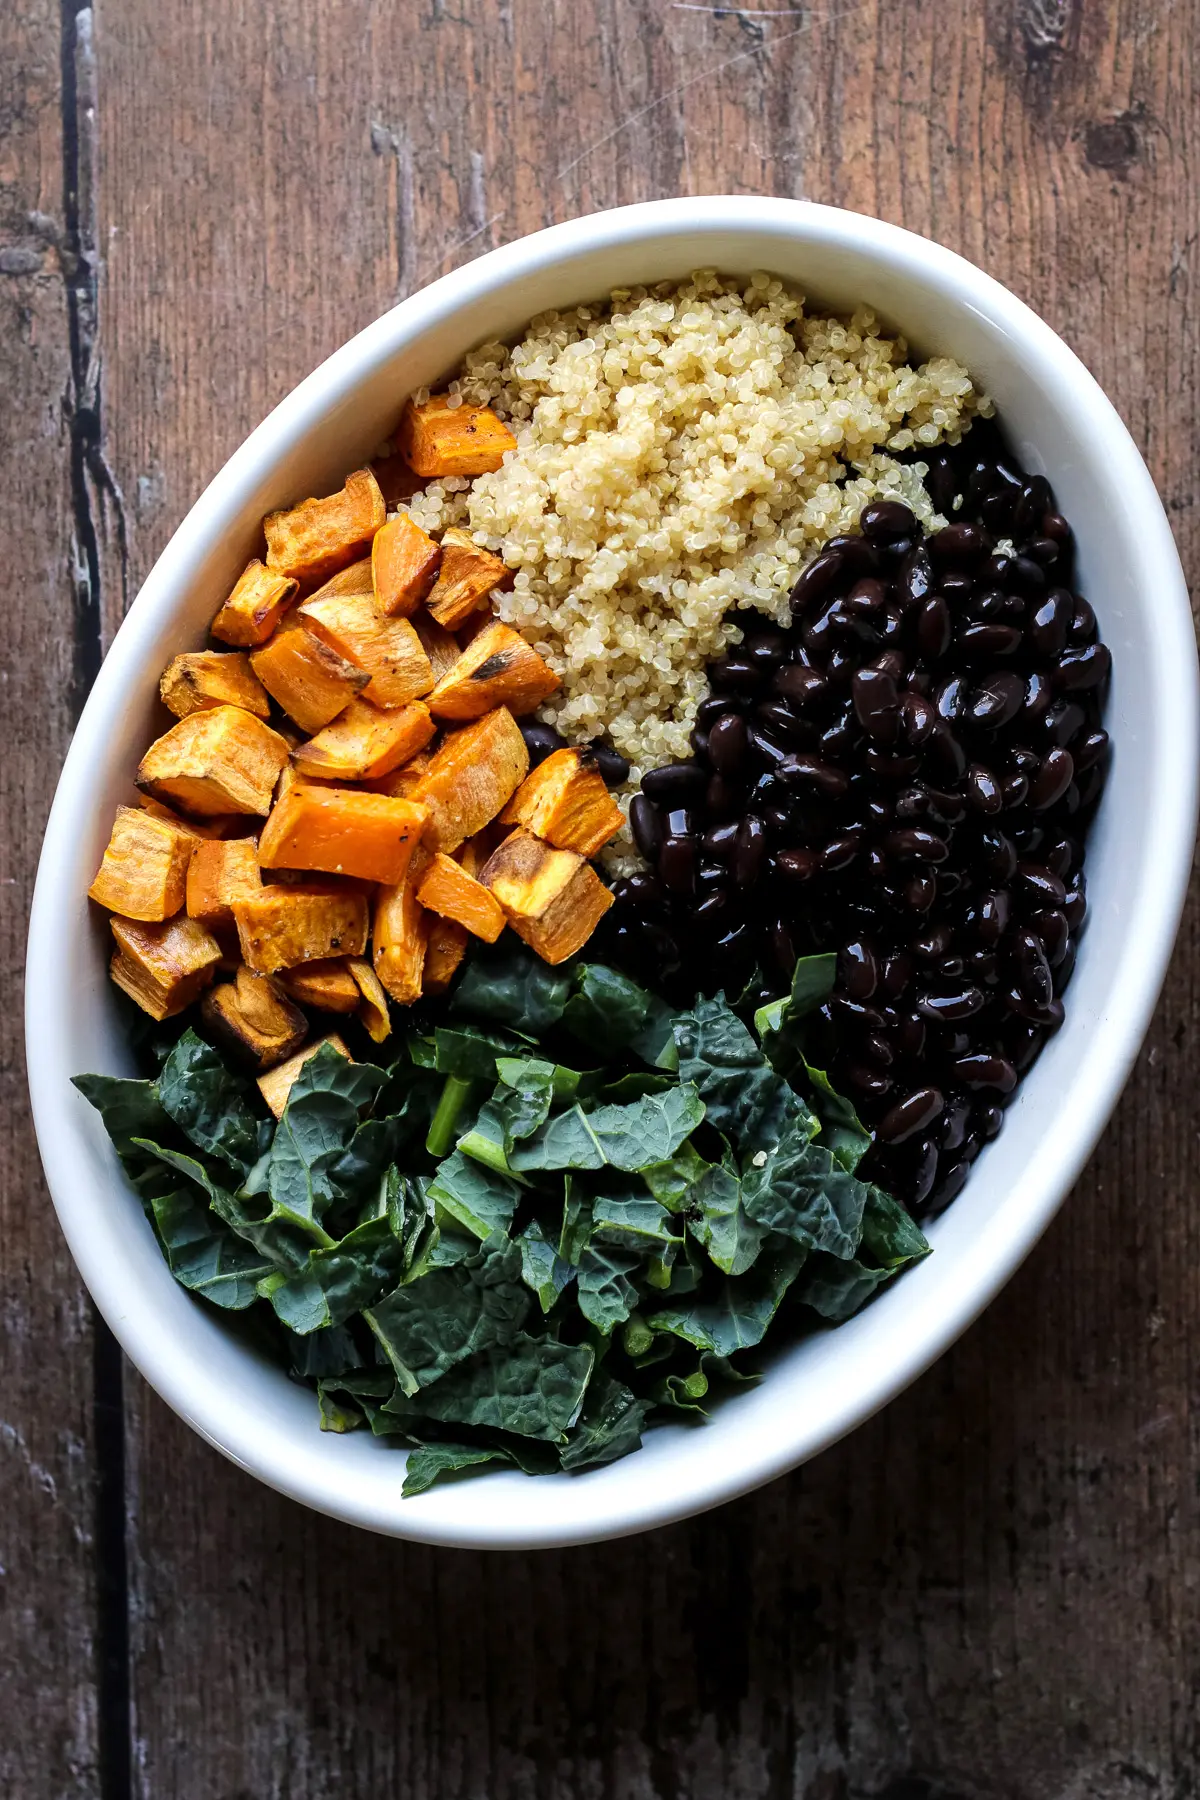 Sweet potato casserole with kale black beans and quinoa before adding the sauce.